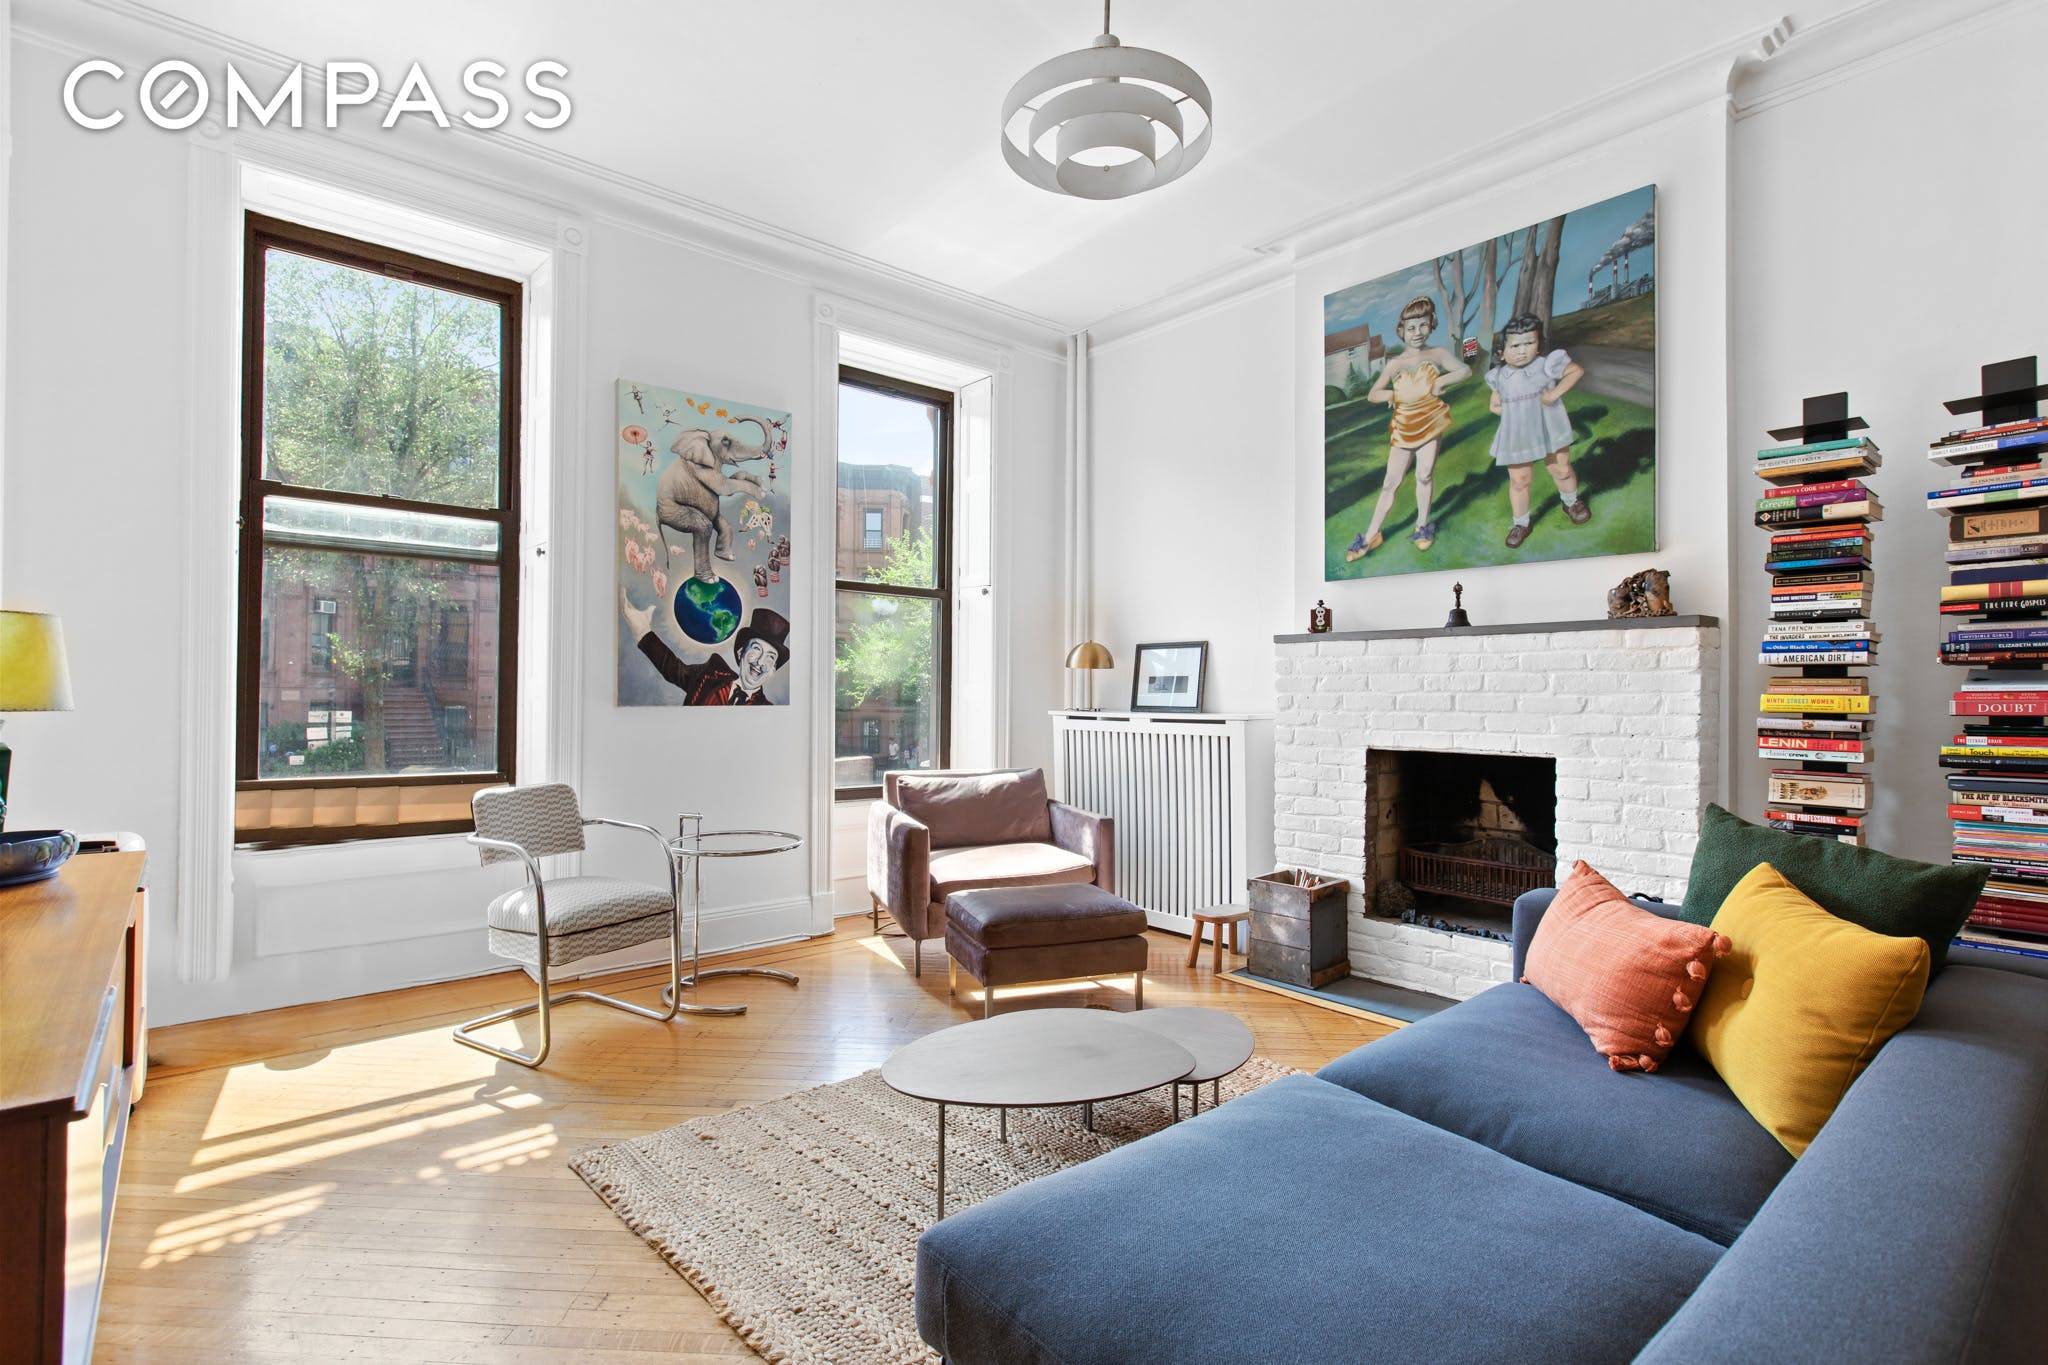 An irresistible, spacious 1 bedroom duplex in a boutique 6 unit brownstone co op charmer in prime Park Slope !